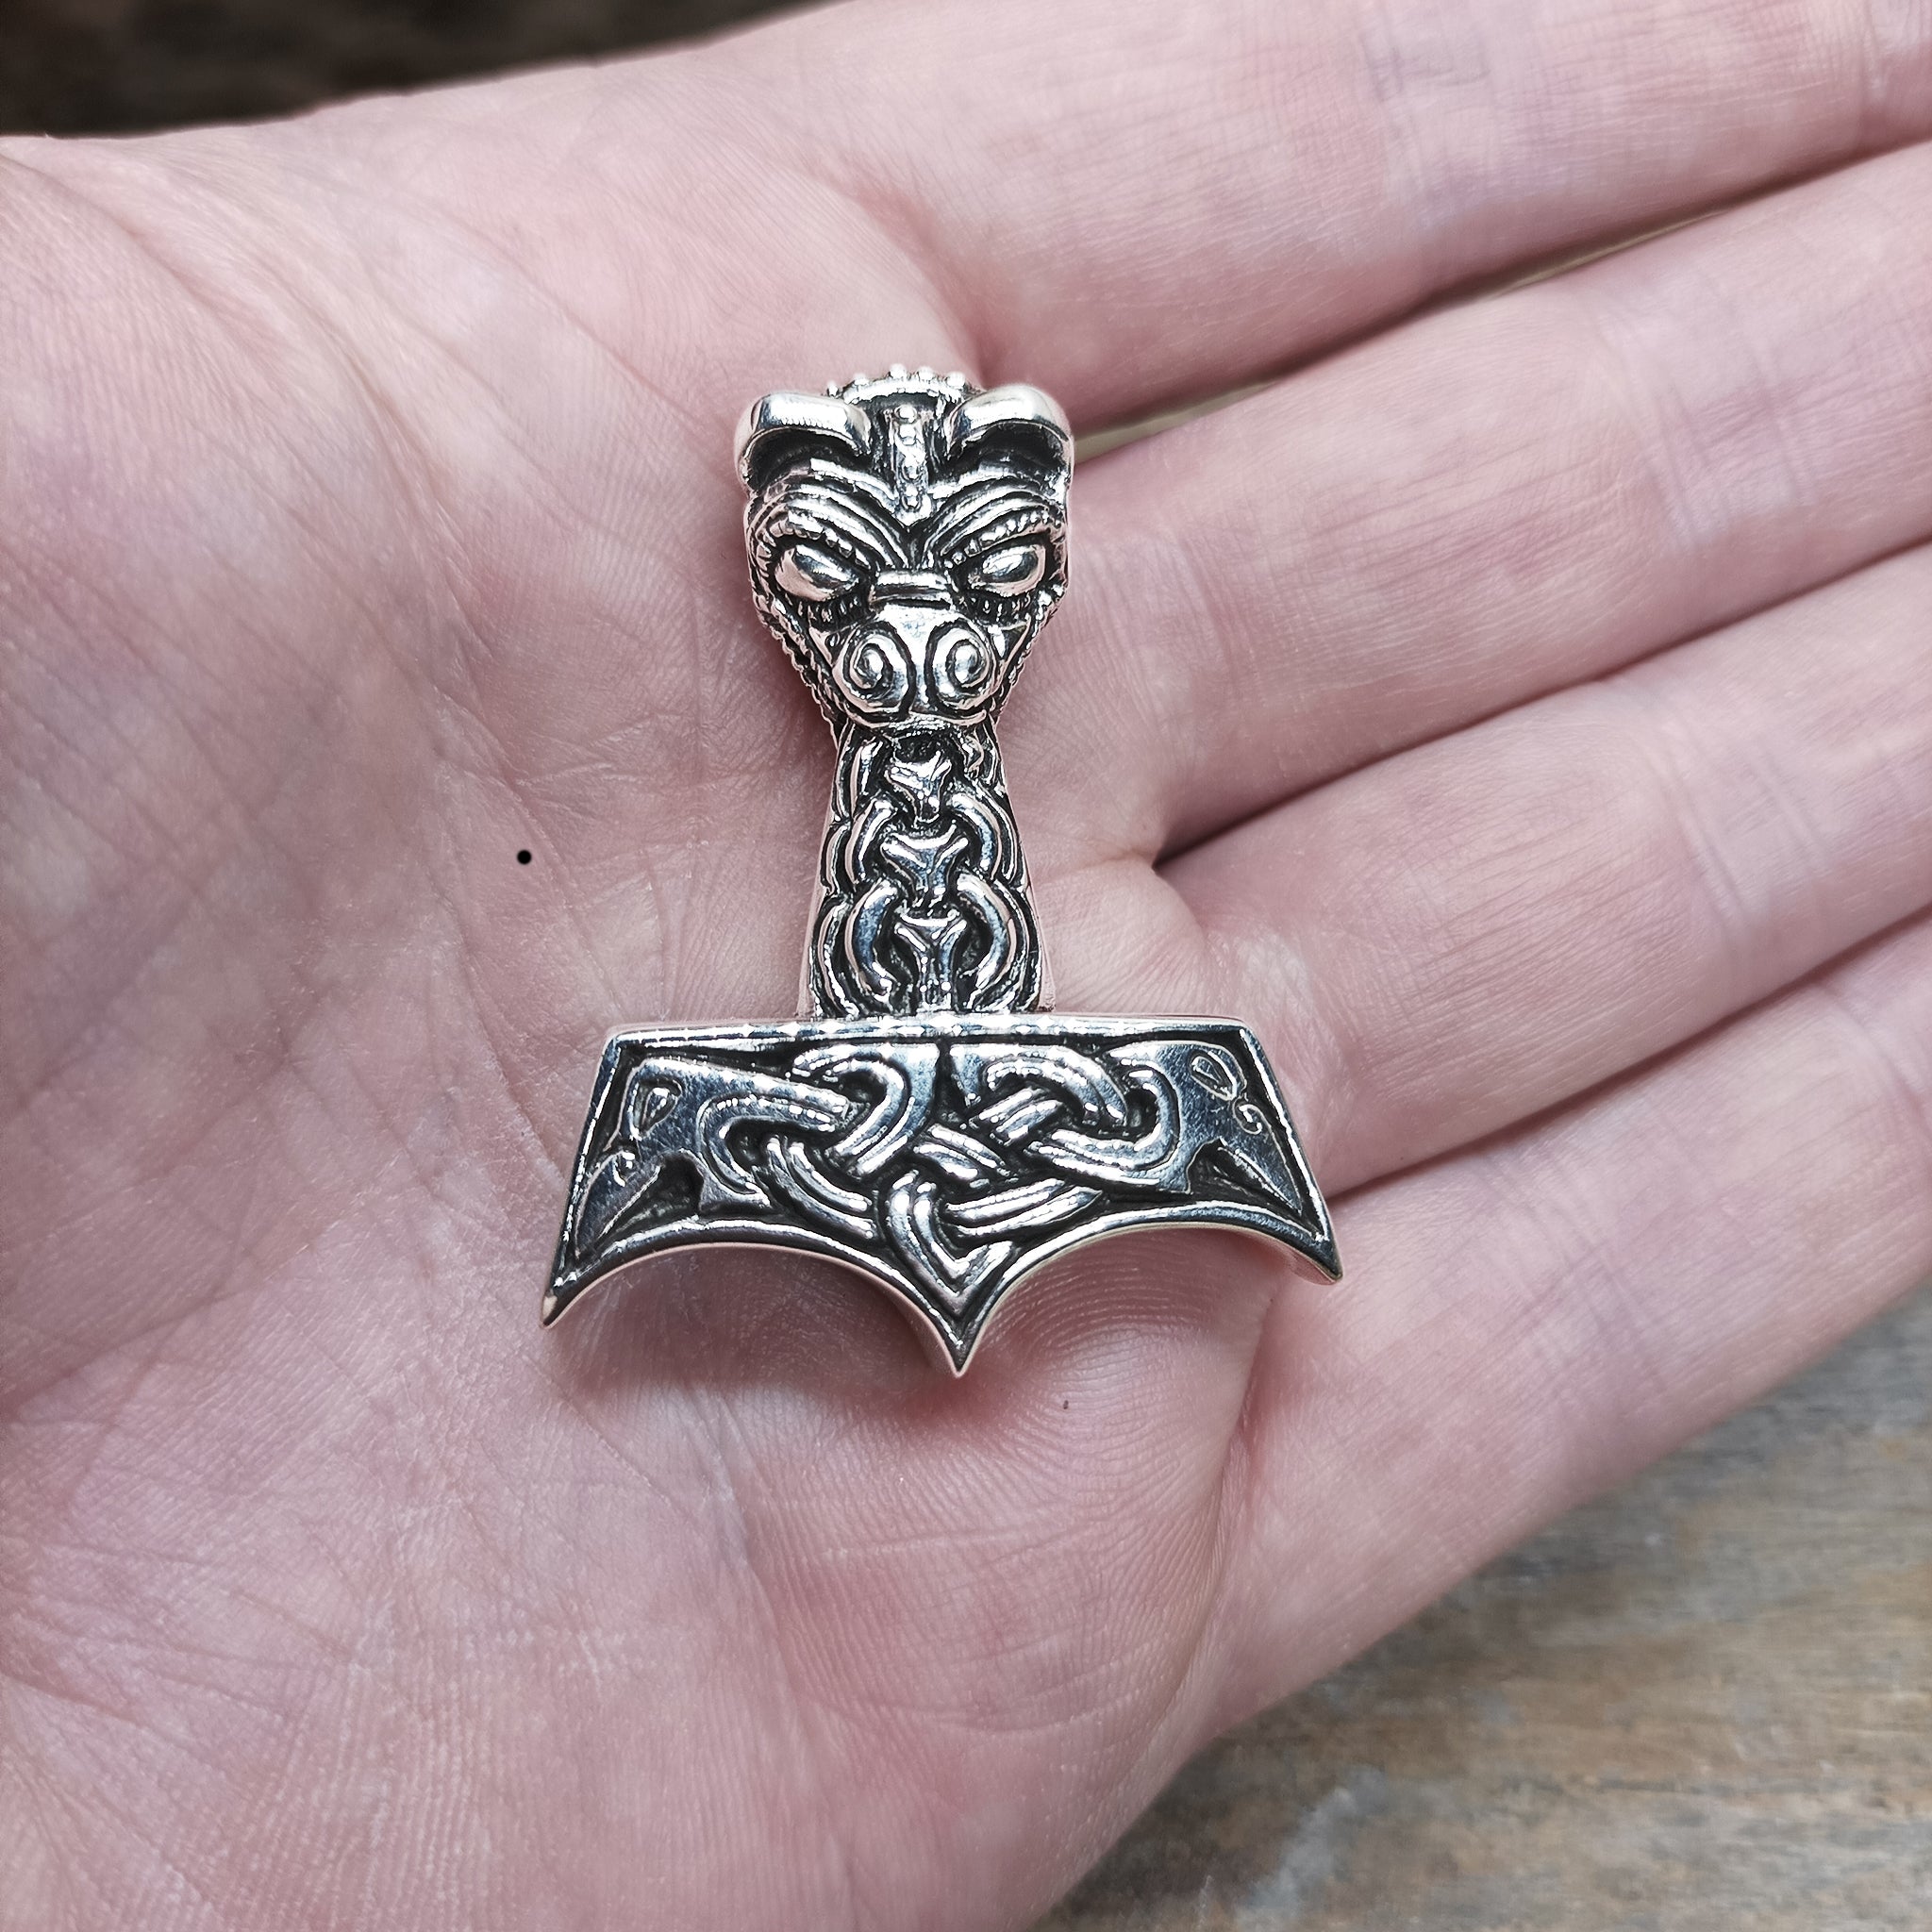 Silver Large And Ferocious Thors Hammer Pendant on Hand